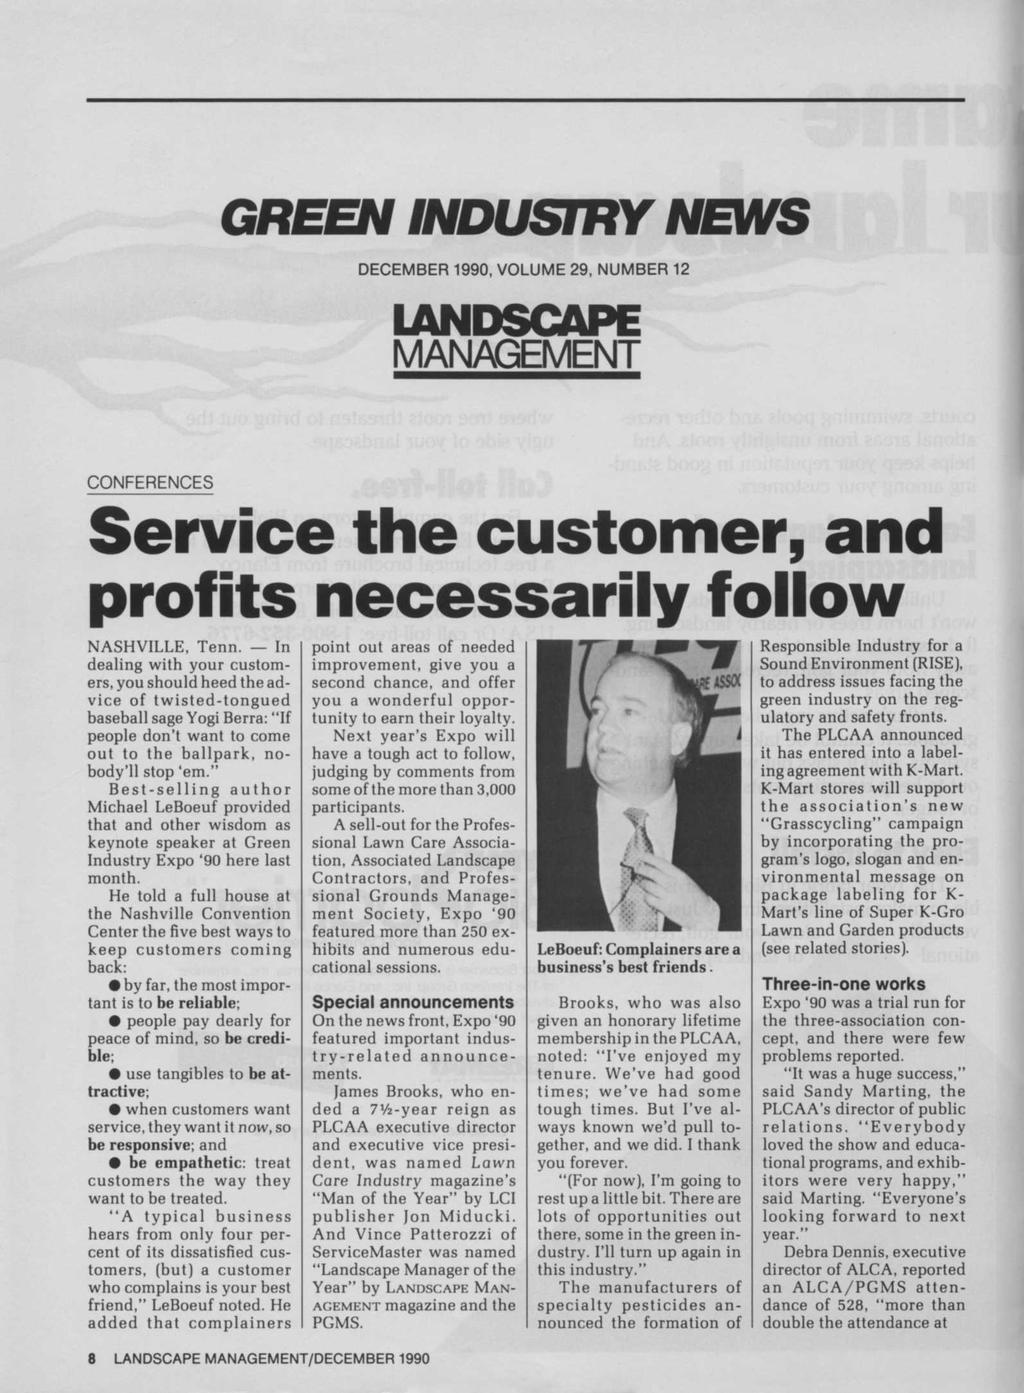 GREEN INDUSTRY NEWS DECEMBER 1990, VOLUME 29, NUMBER 12 LANDSCAPE MANAGEMENT CONFERENCES Service the customer, and profits necessarily follow NASHVILLE, Tenn.